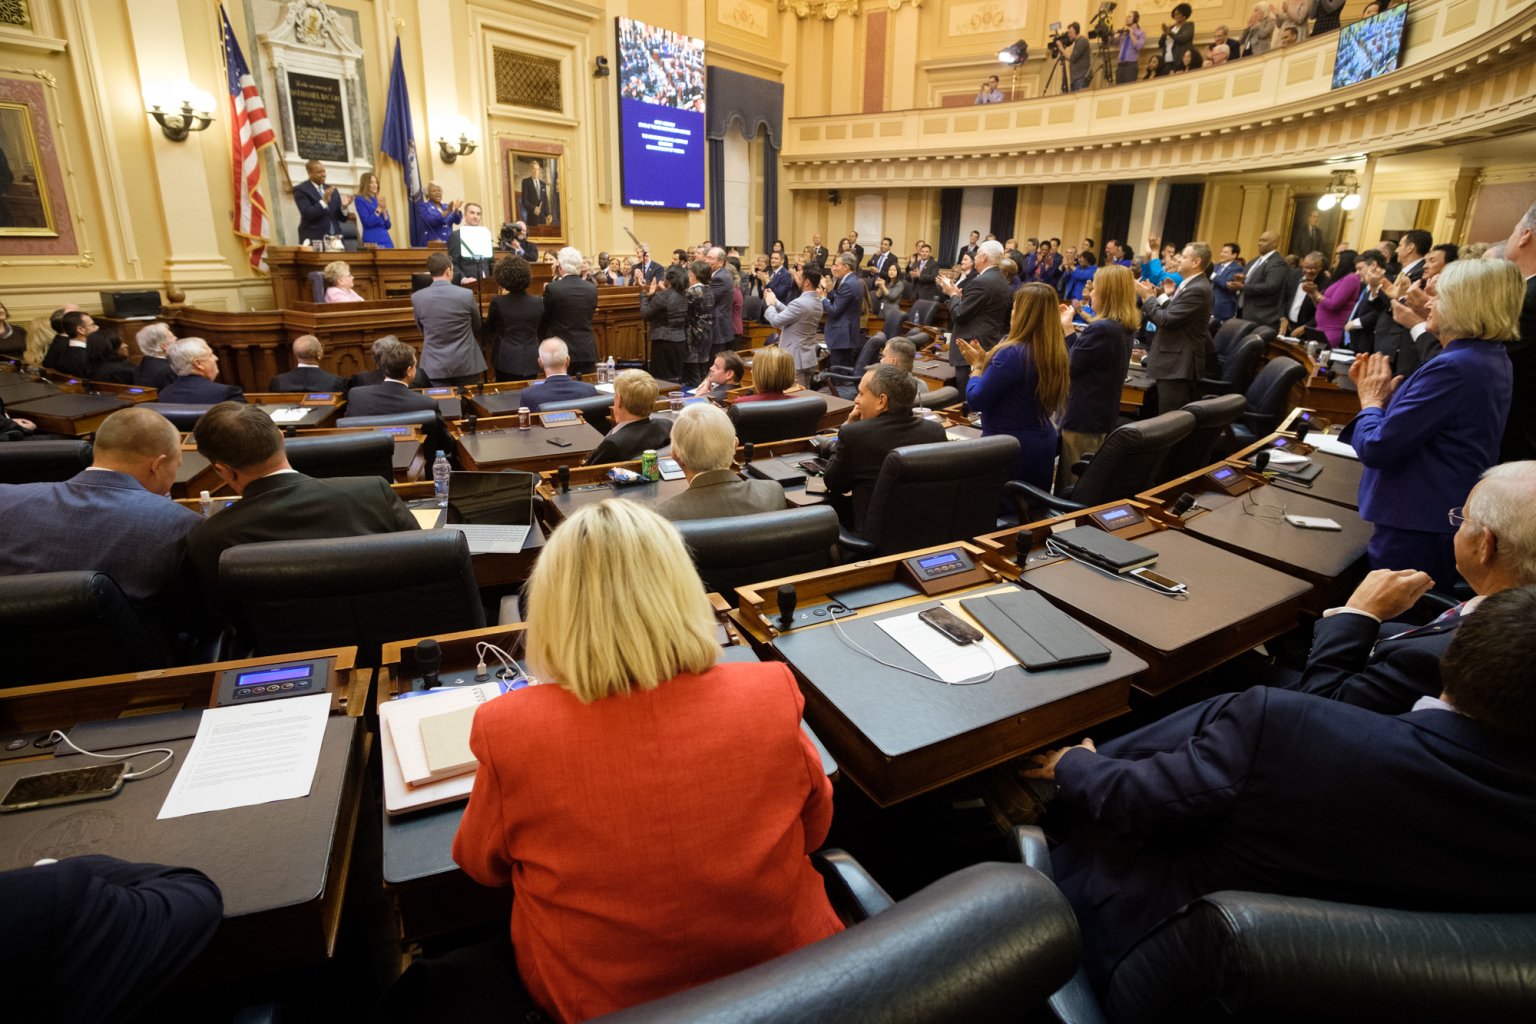 With 17 Va. House incumbents being challenged, Tuesday could be a wild primary night